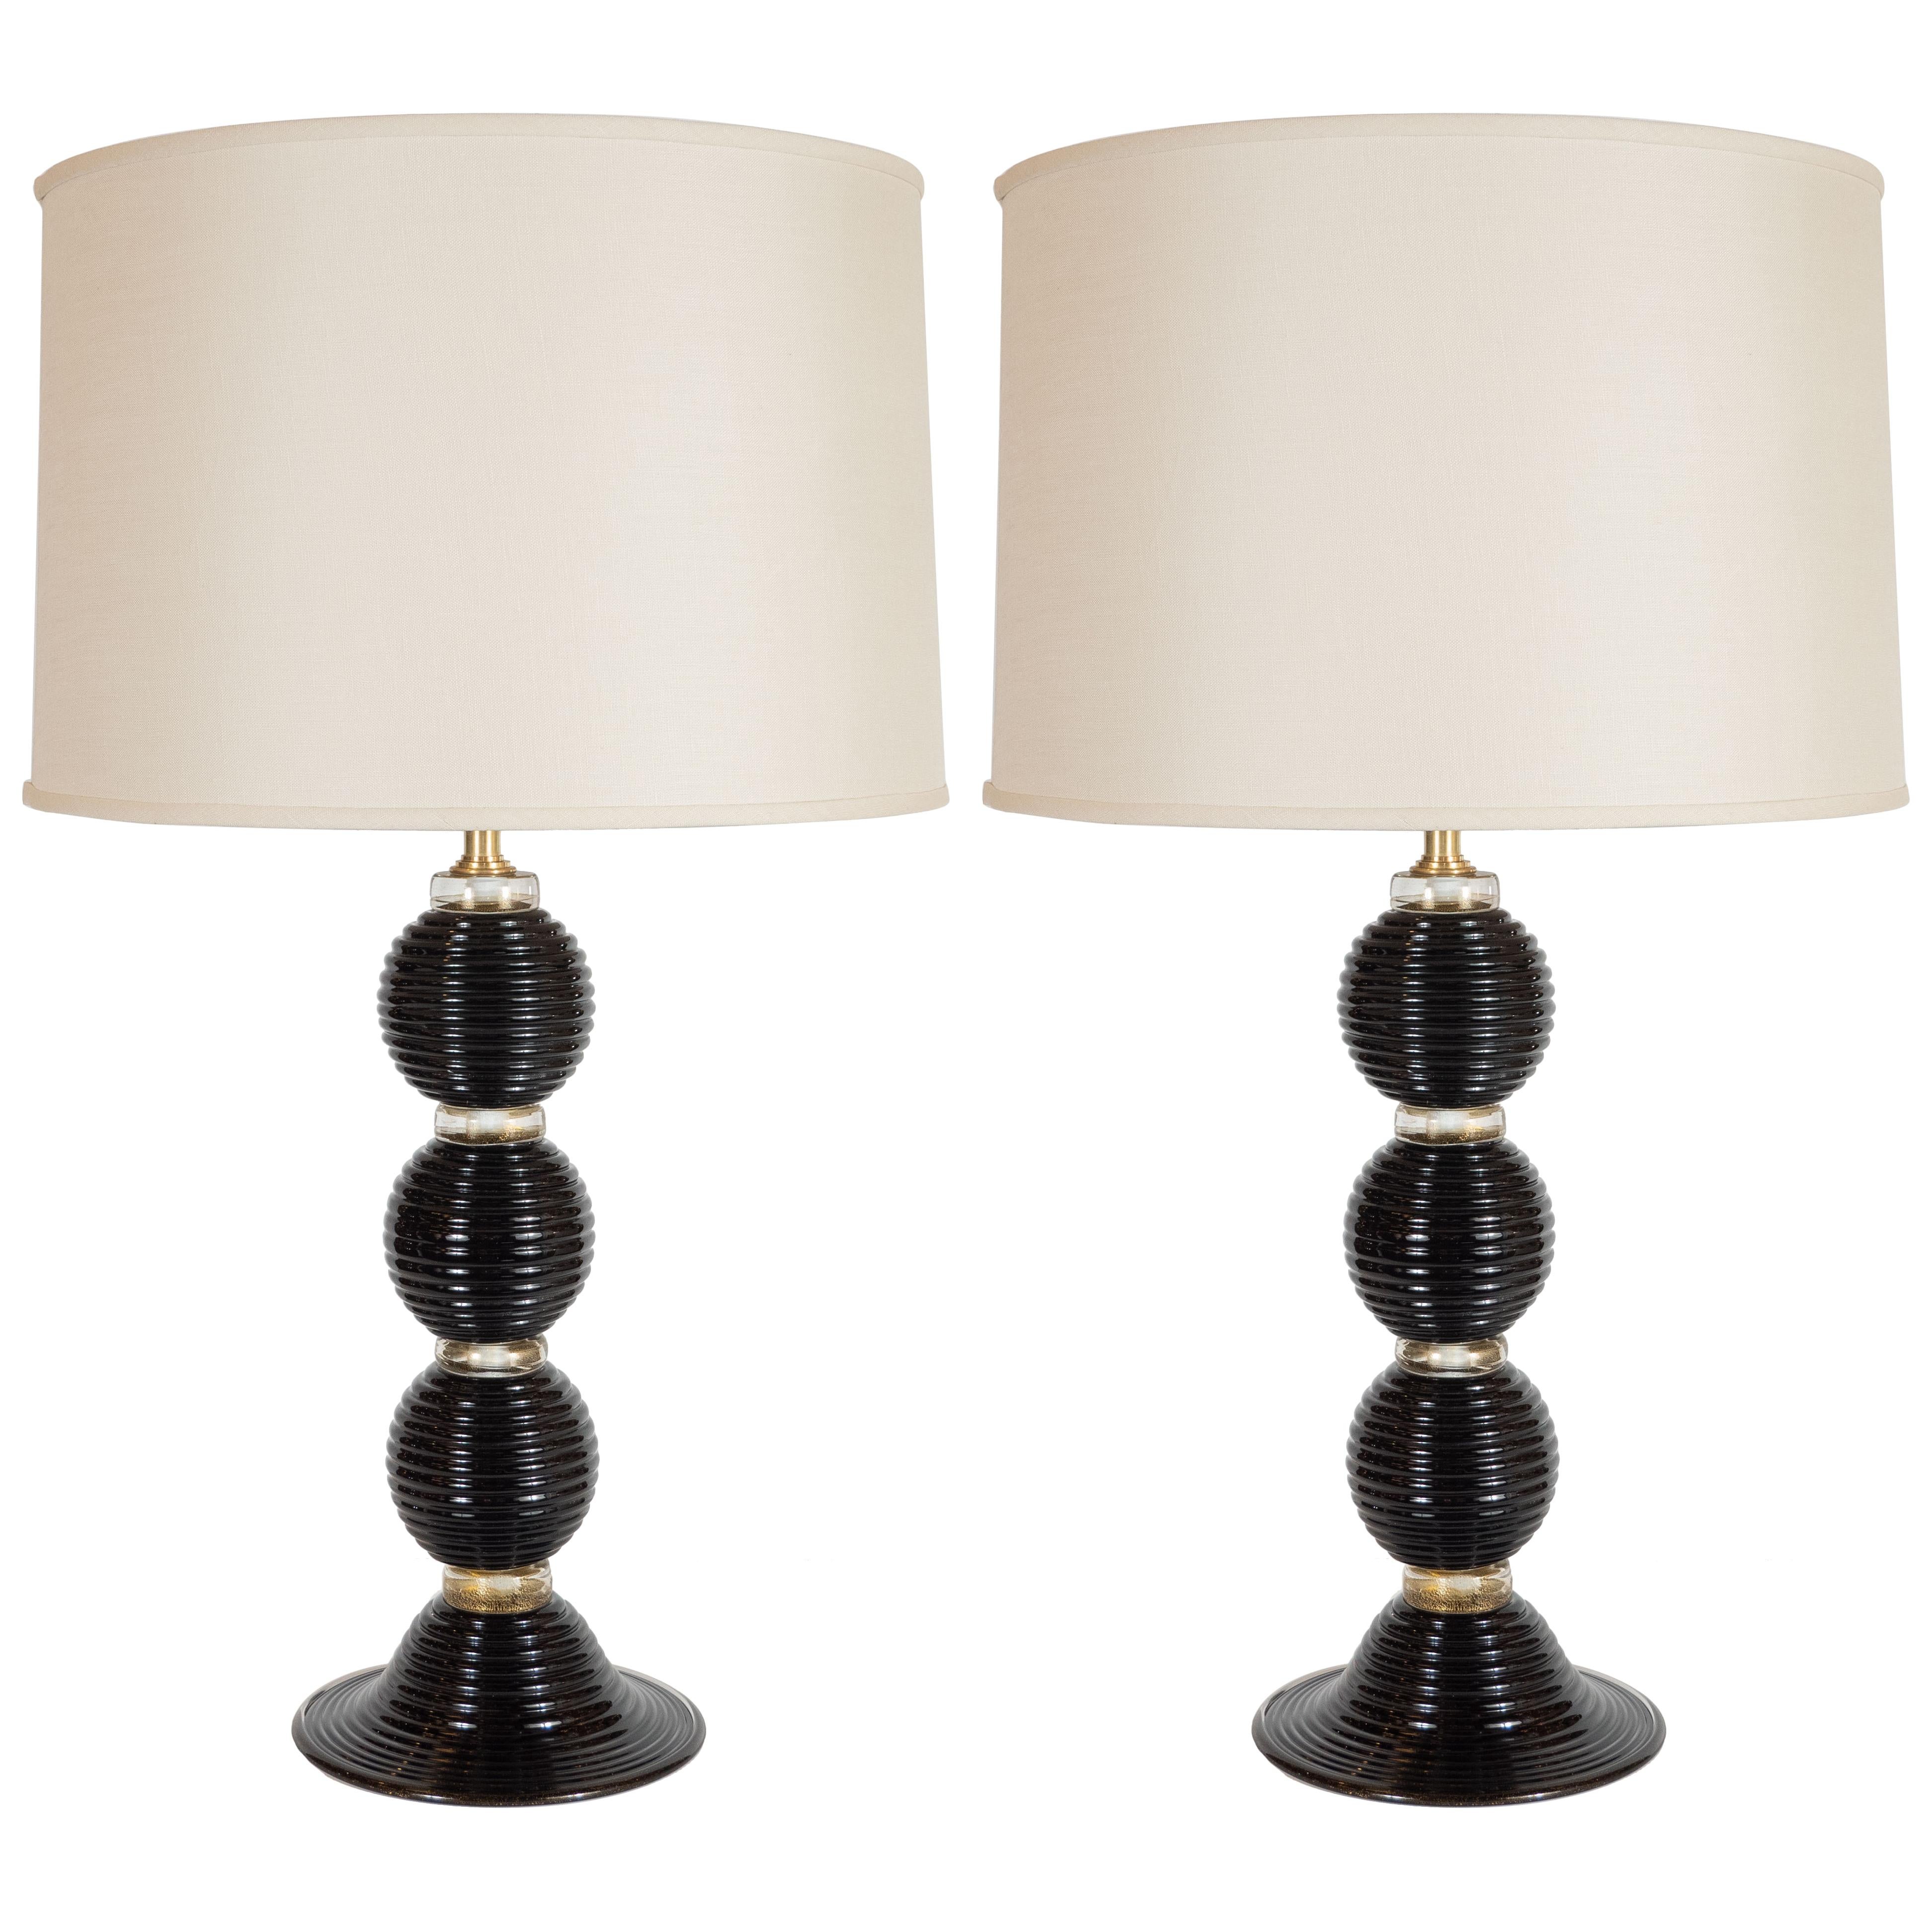 Pair of Modernist Handblown Black Murano Table Lamps with 24-Karat Gold Banding For Sale